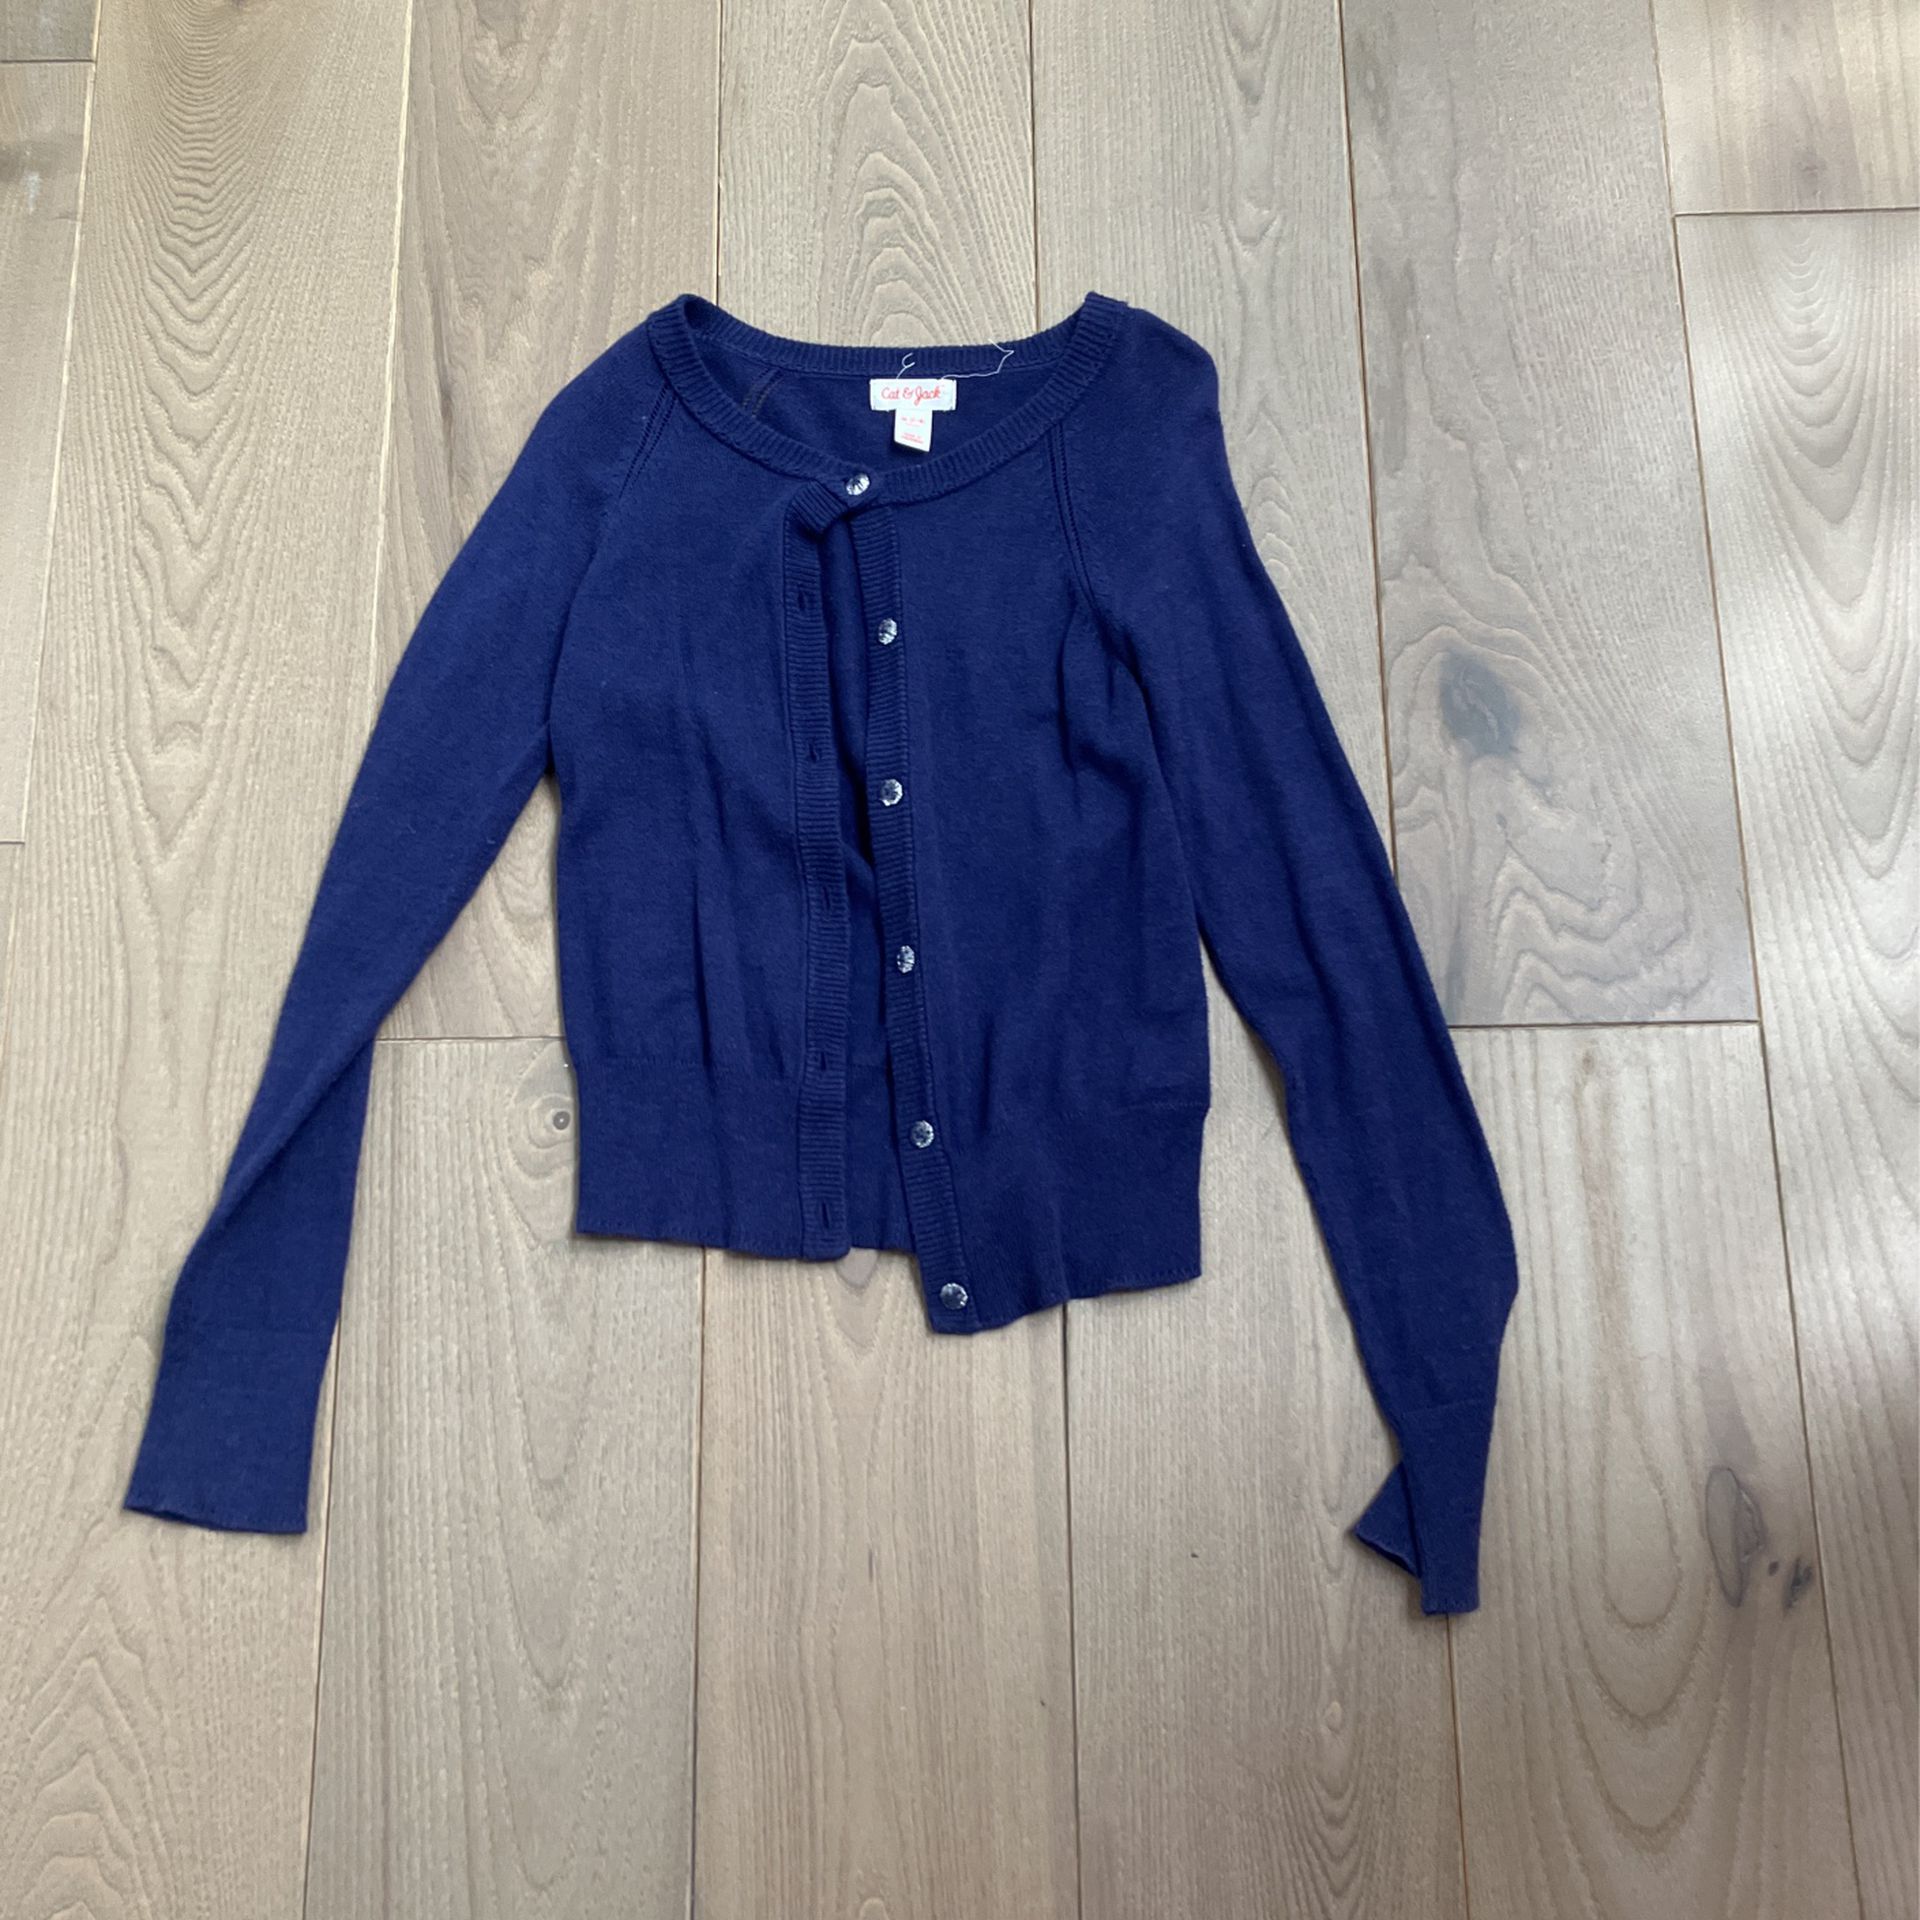 Blue Cardigan For Girls. Brand Cat & Jack. Size M Kids. Ages 7/8